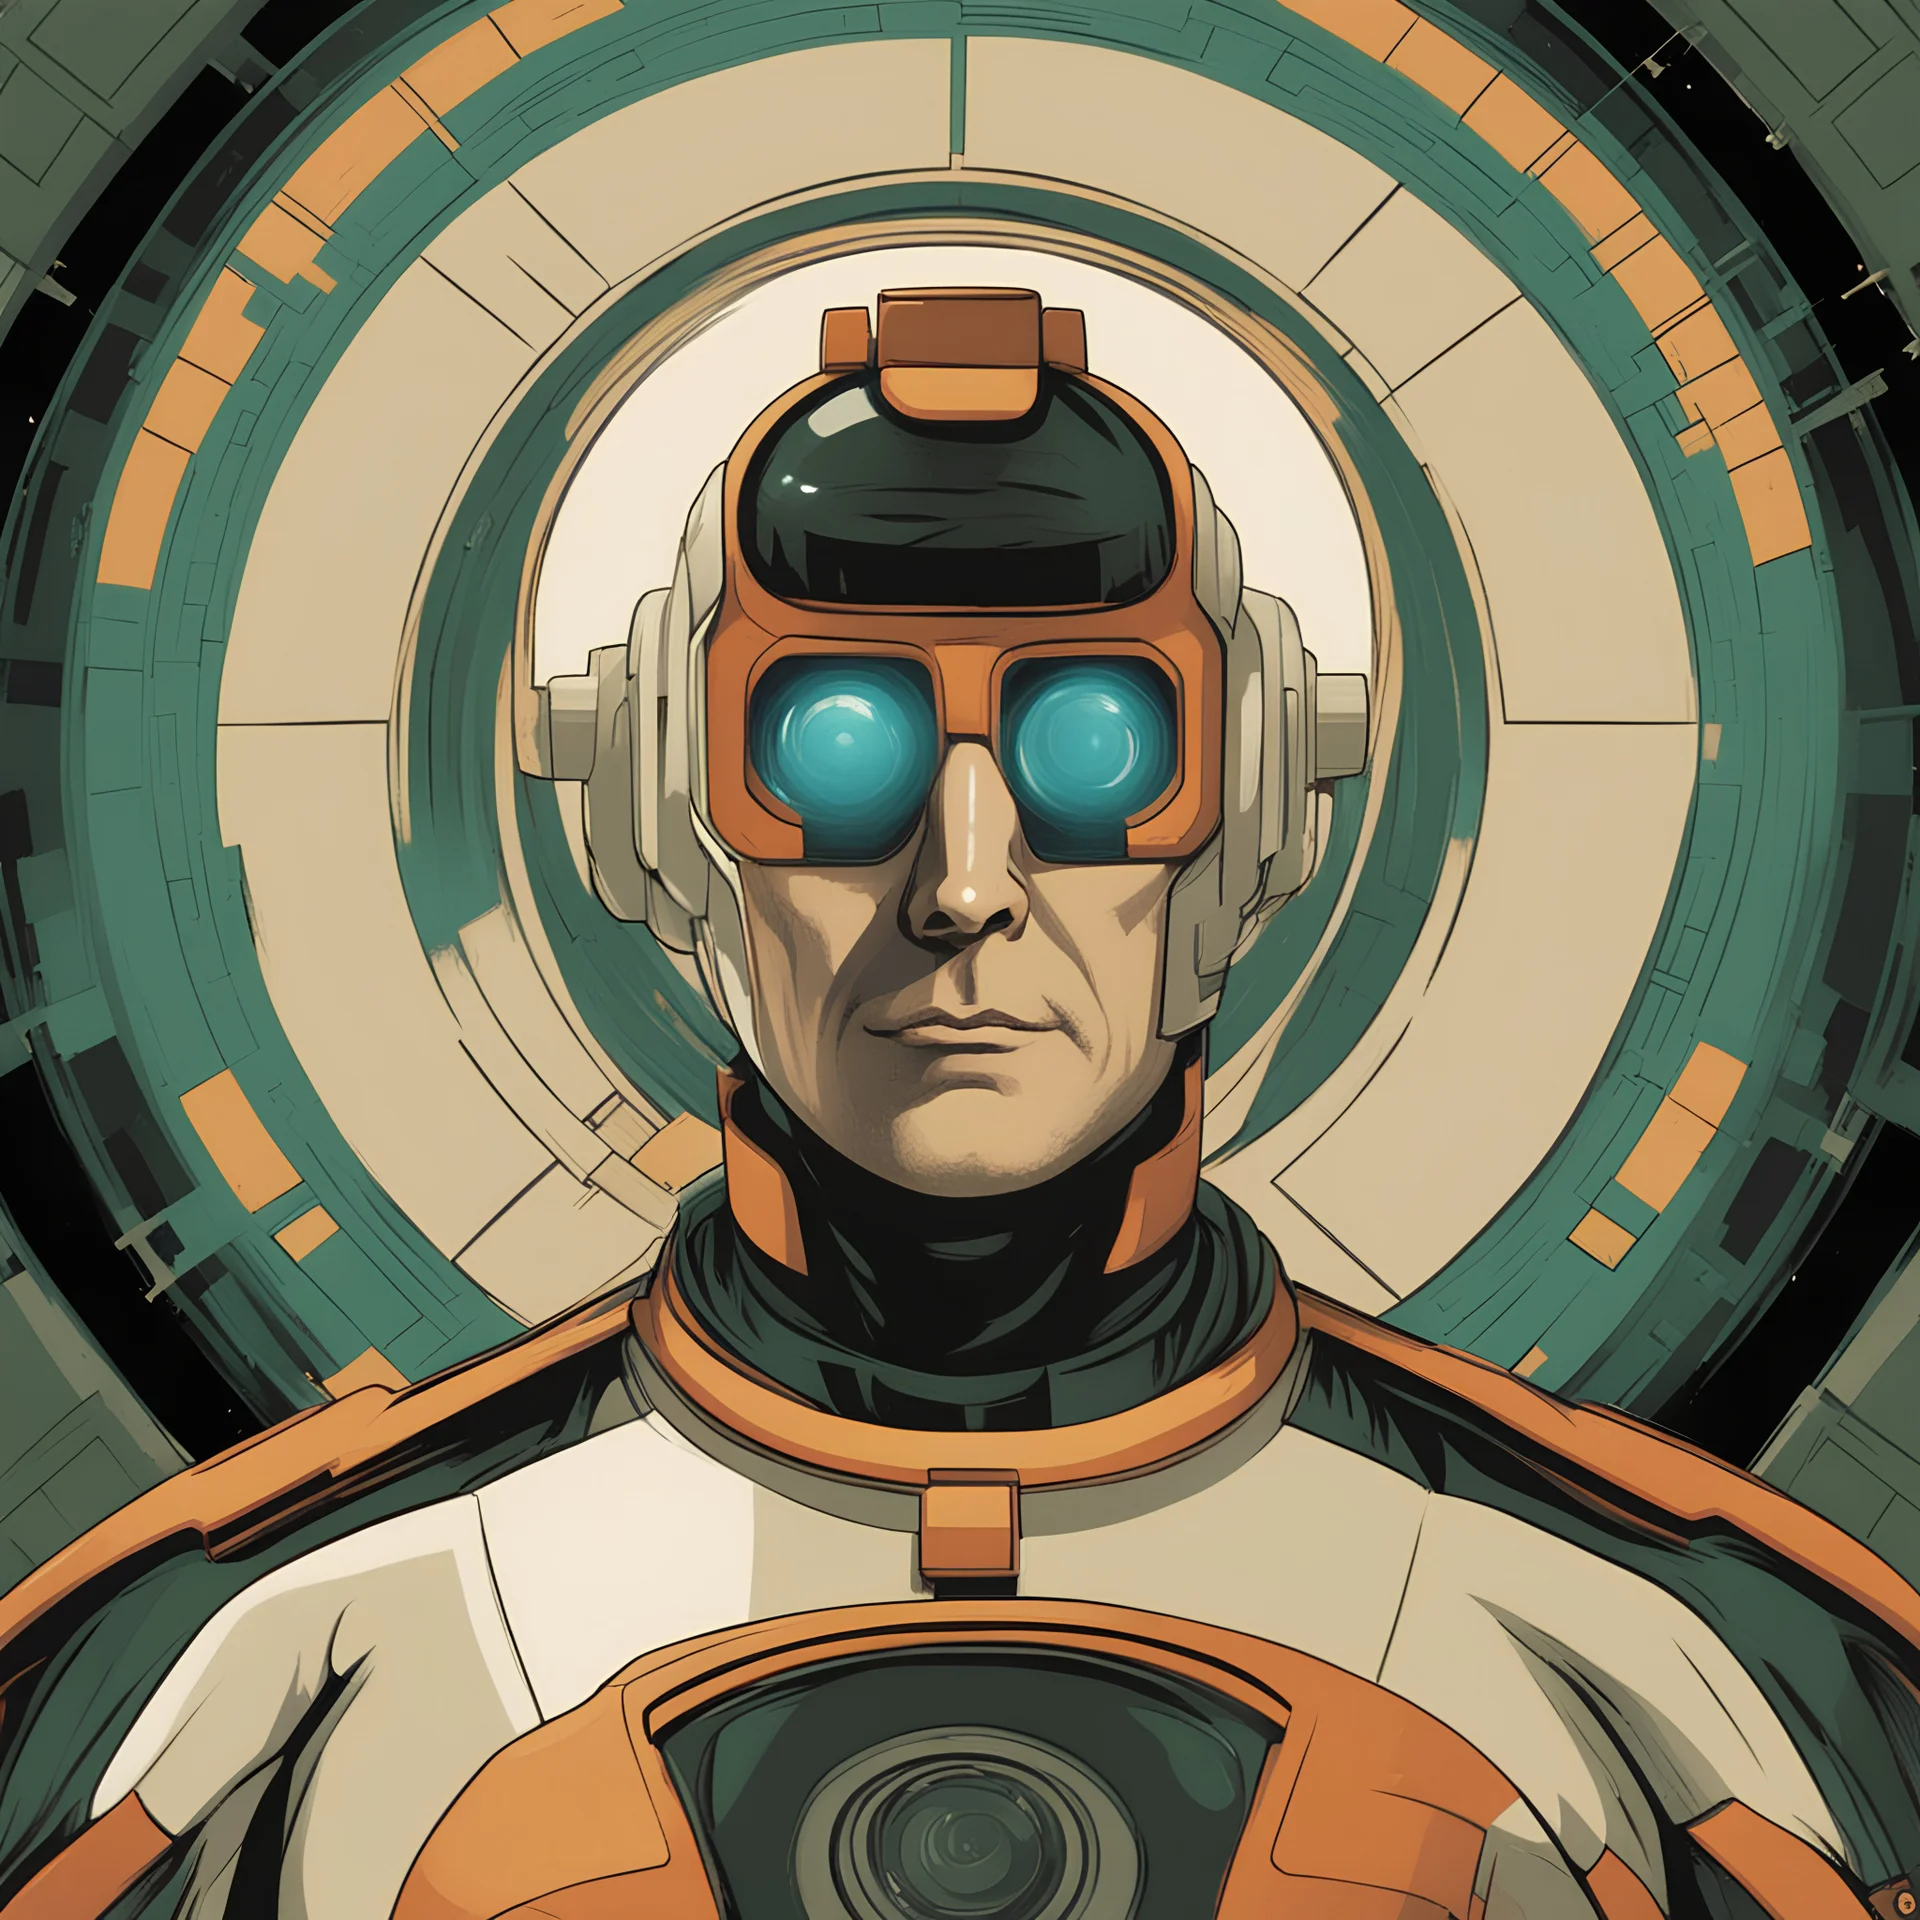 A nice profile picture for the avatar behind the name halsimov based on Hal 9000 computer mixed with an old Isaac Asimov portrait and Hal Jordan persona, vibrant color scheme